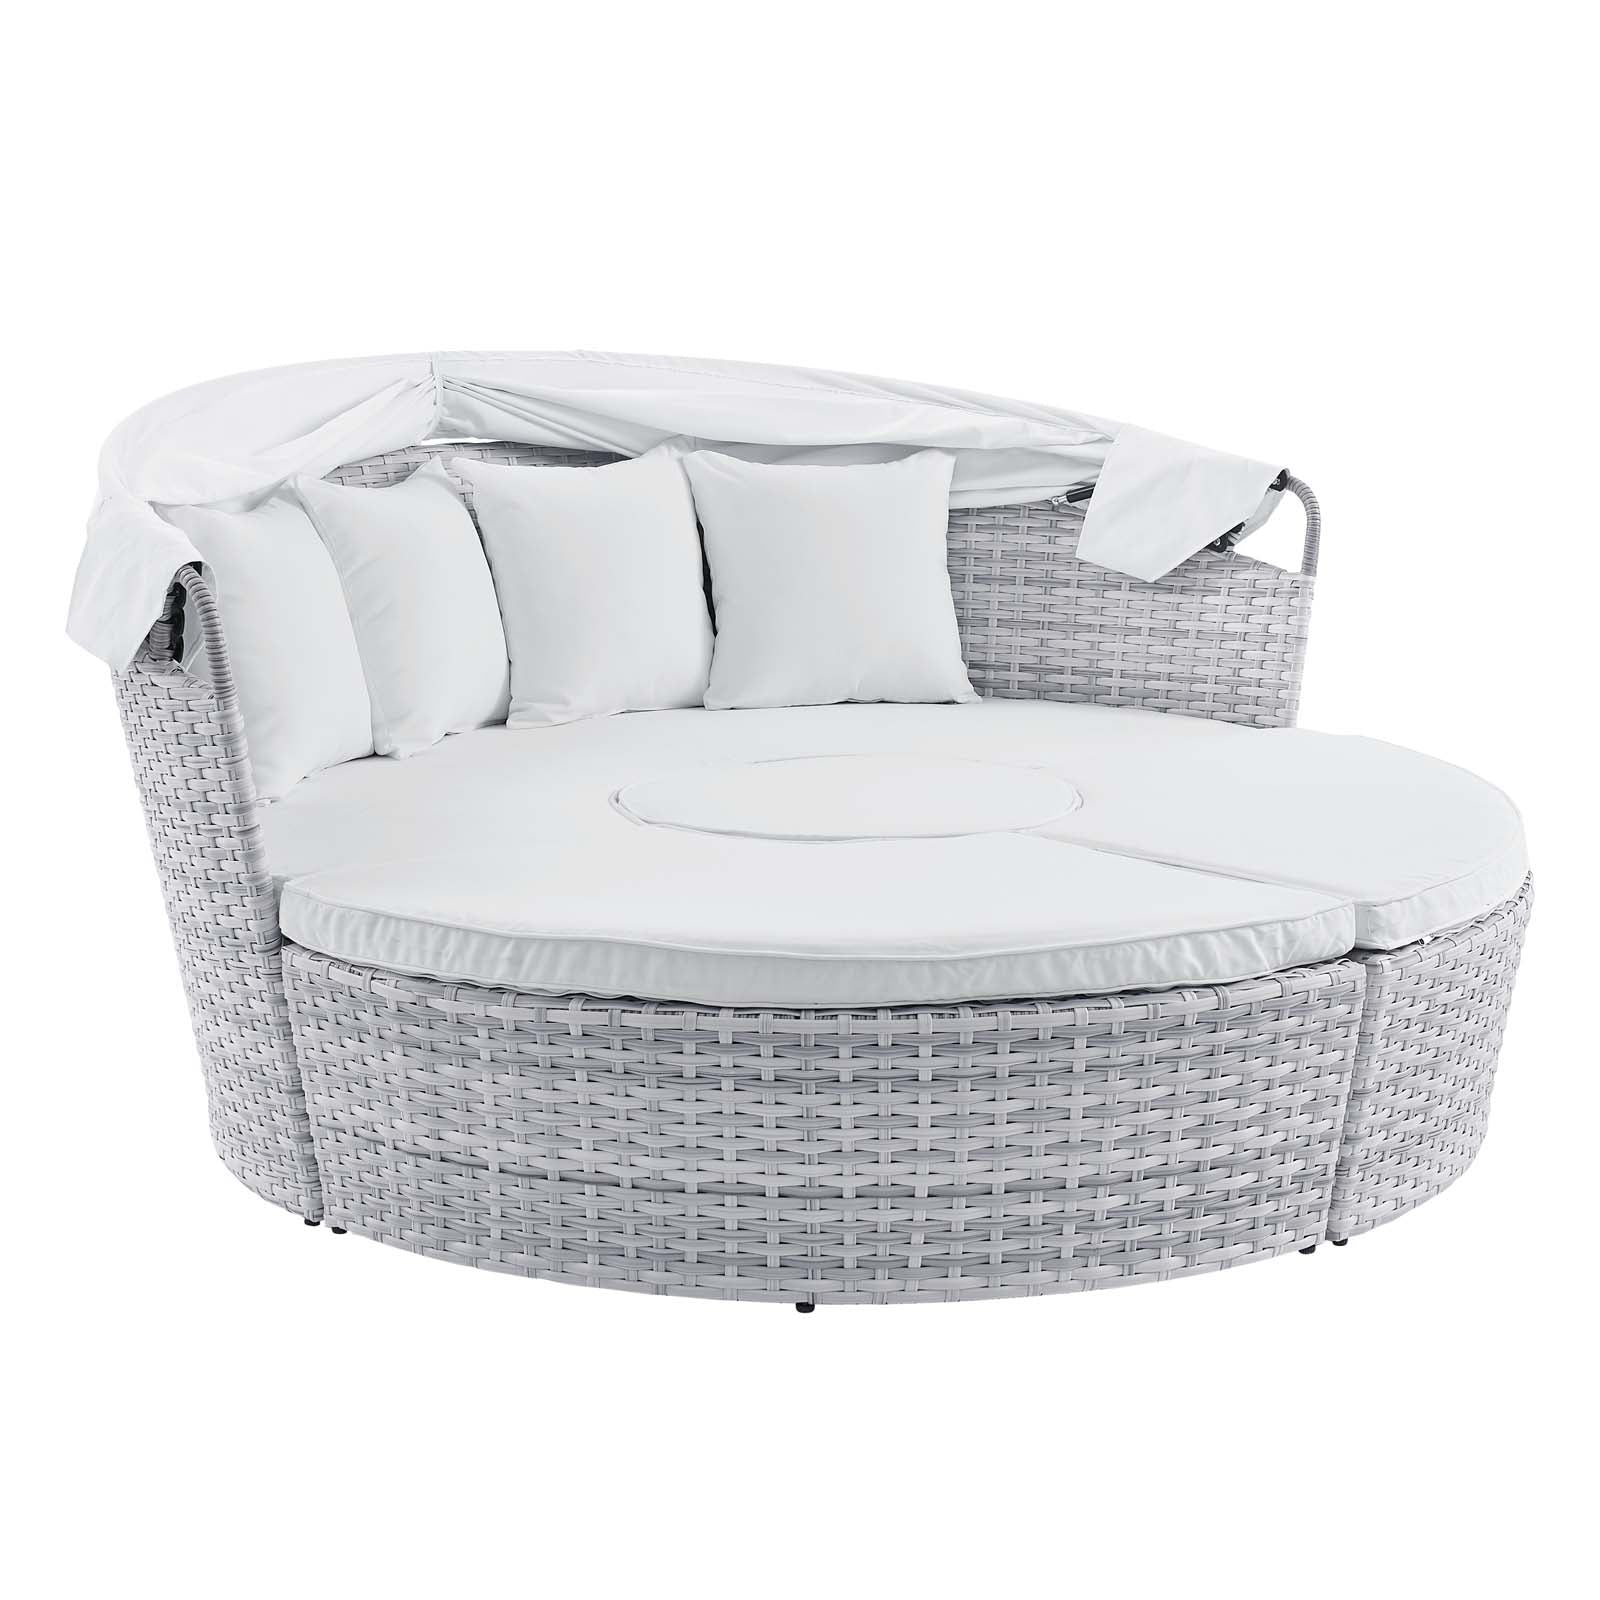 Modway Patio Daybeds - Scottsdale Canopy Sunbrella Outdoor Patio Daybed Light Gray White